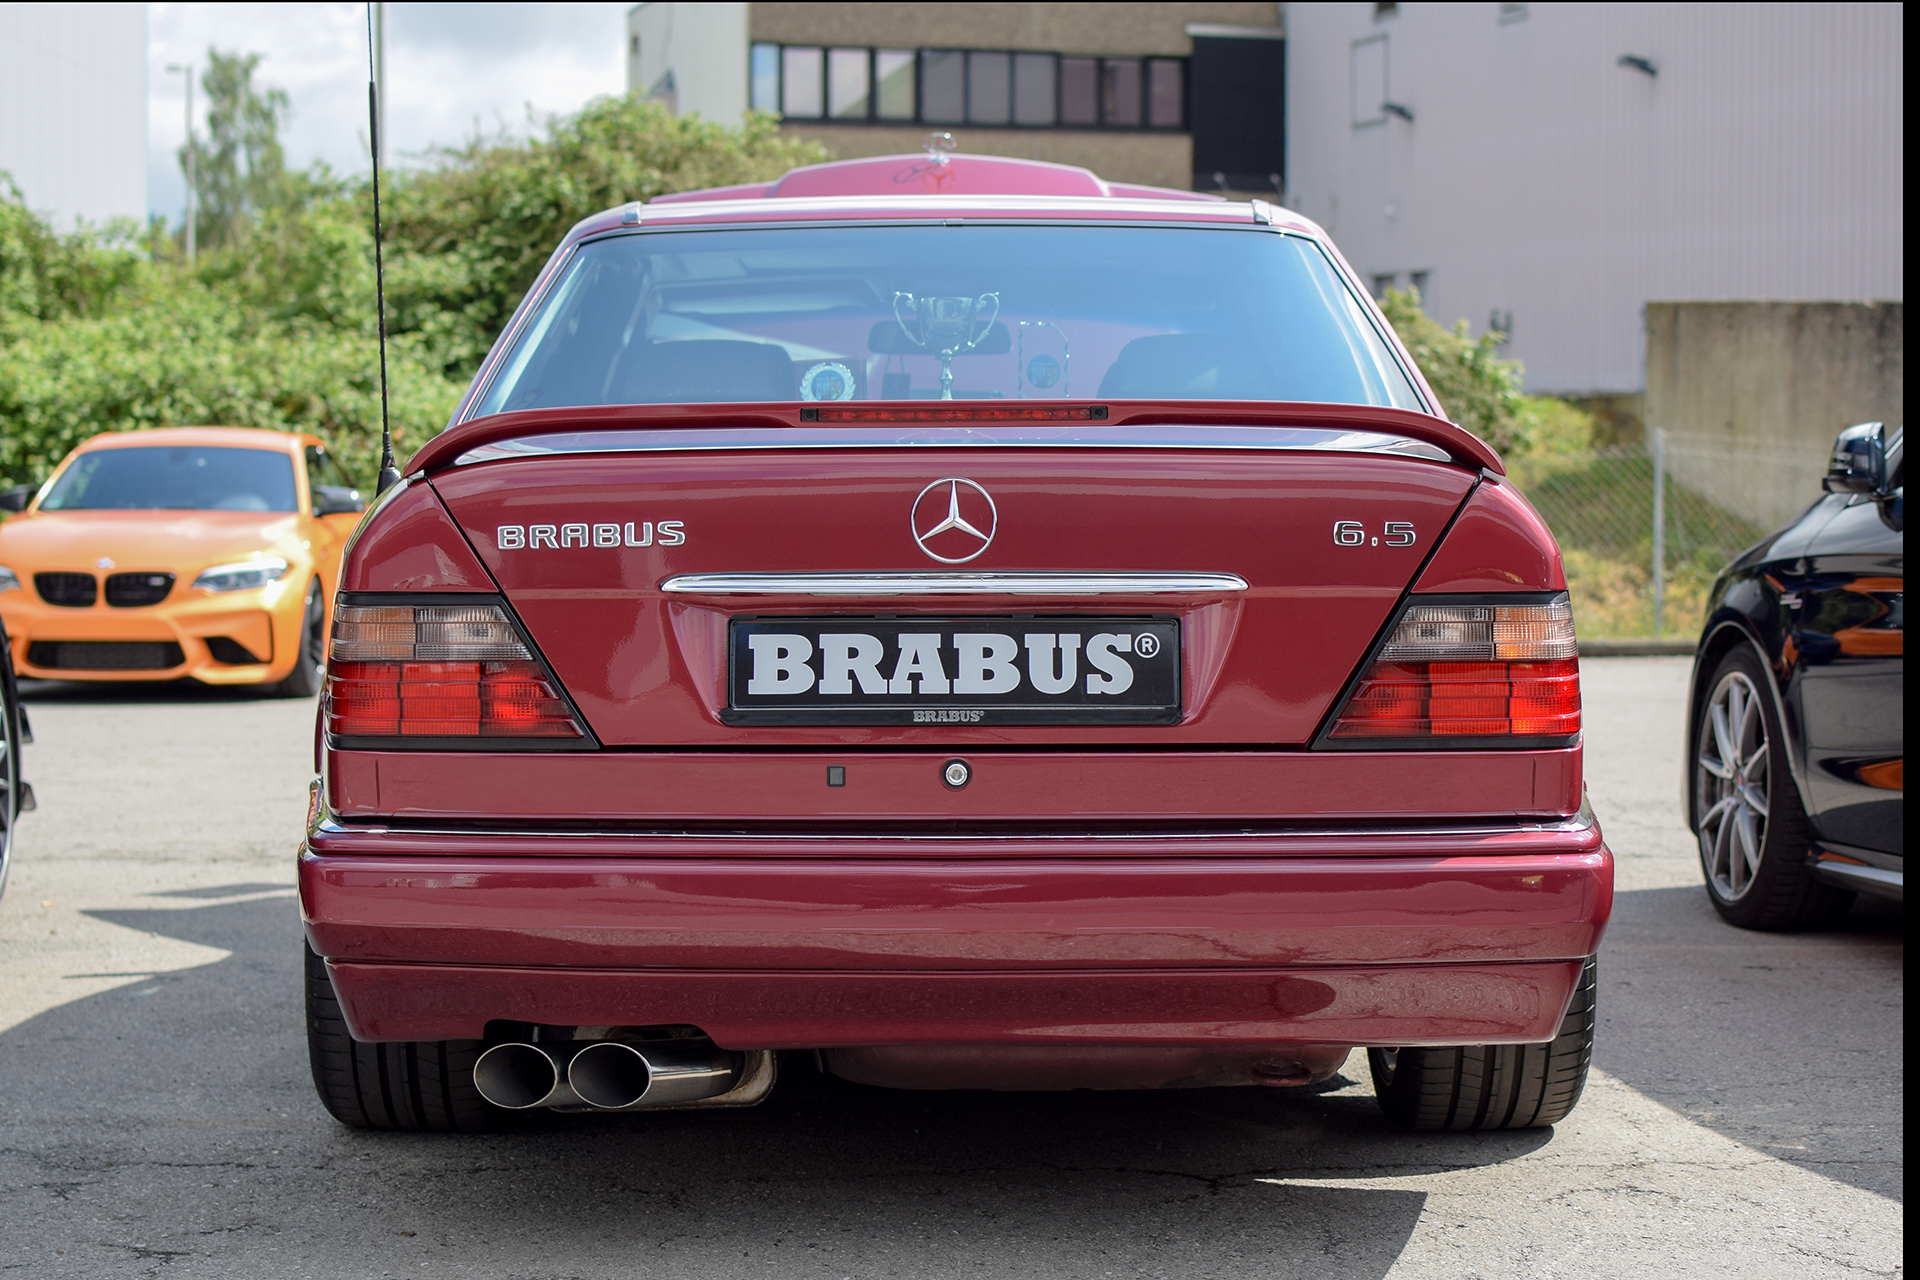 Brabus 6.5 1994 (W124 E60 AMG) back - Cars & Coffee Deluxe Luxembourg Mai 2019